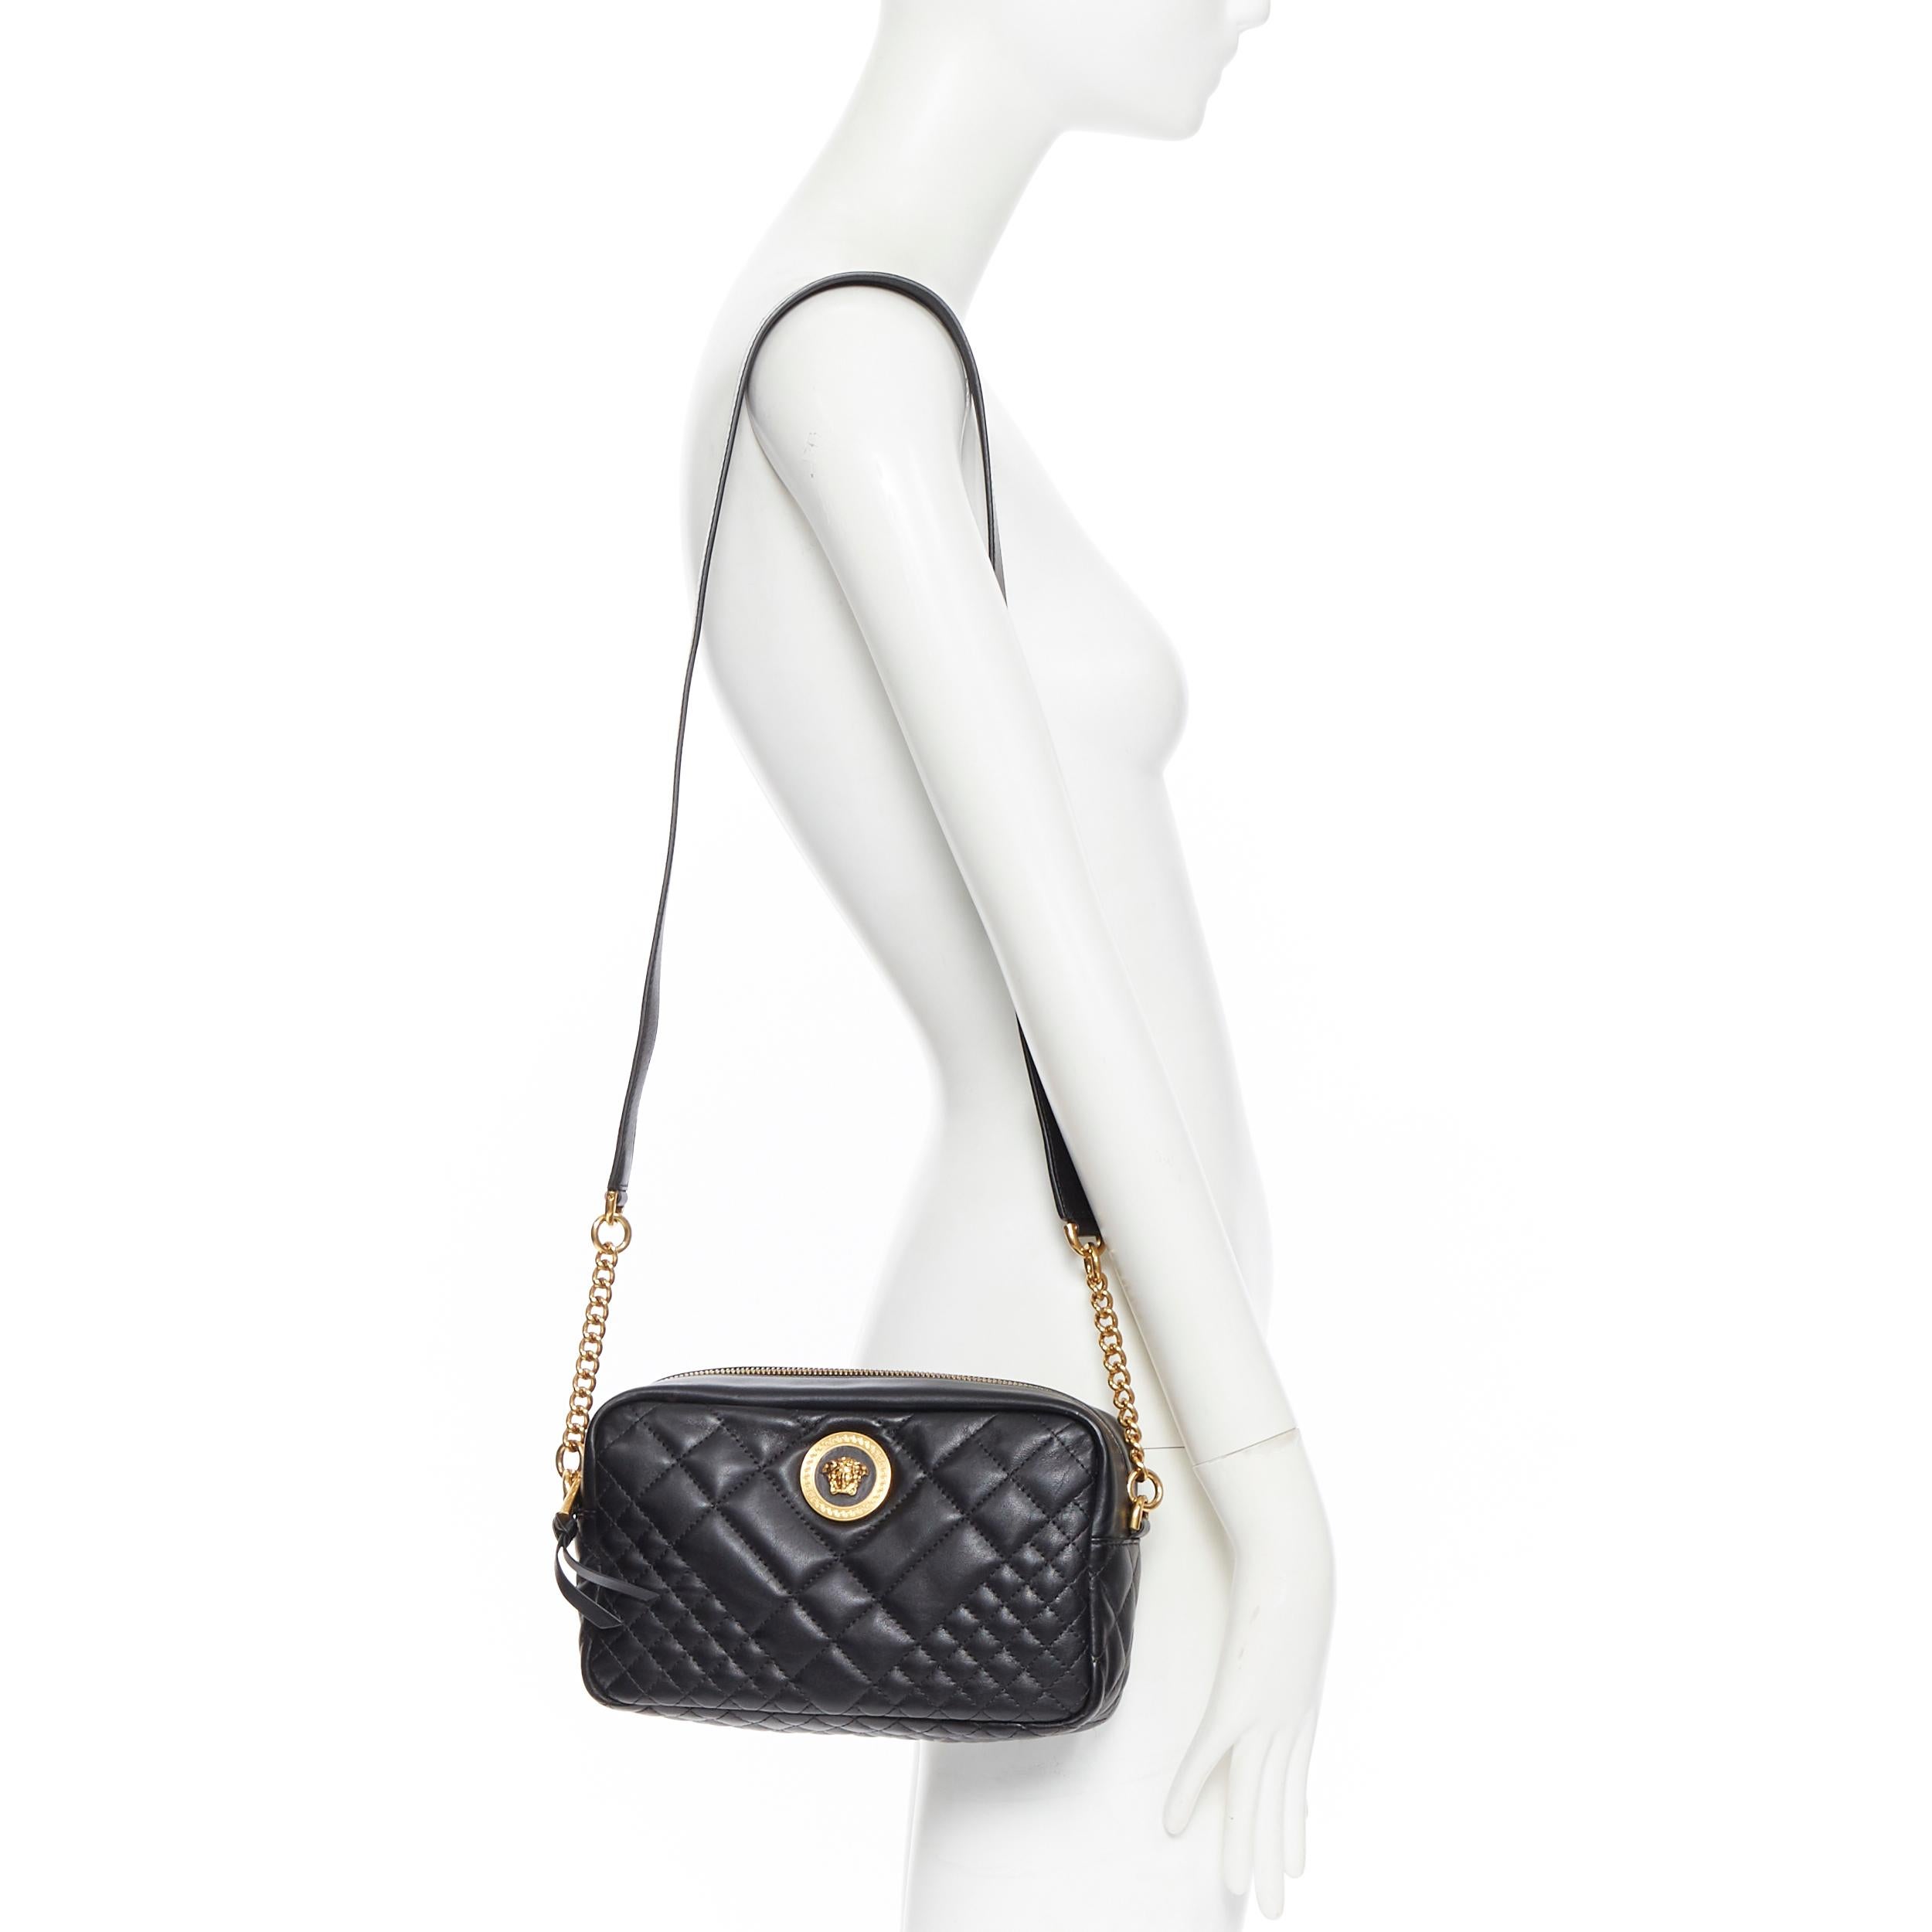 new VERSACE black diamond quilted lamb leather medusa gold chain shoulder bag
Brand: Versace
Designer: Donatella Versace
Model Name / Style: Quilted crossbody
Material: Leather; lamb
Color: Black
Pattern: Solid
Closure: Zip
Extra Detail: Nickel